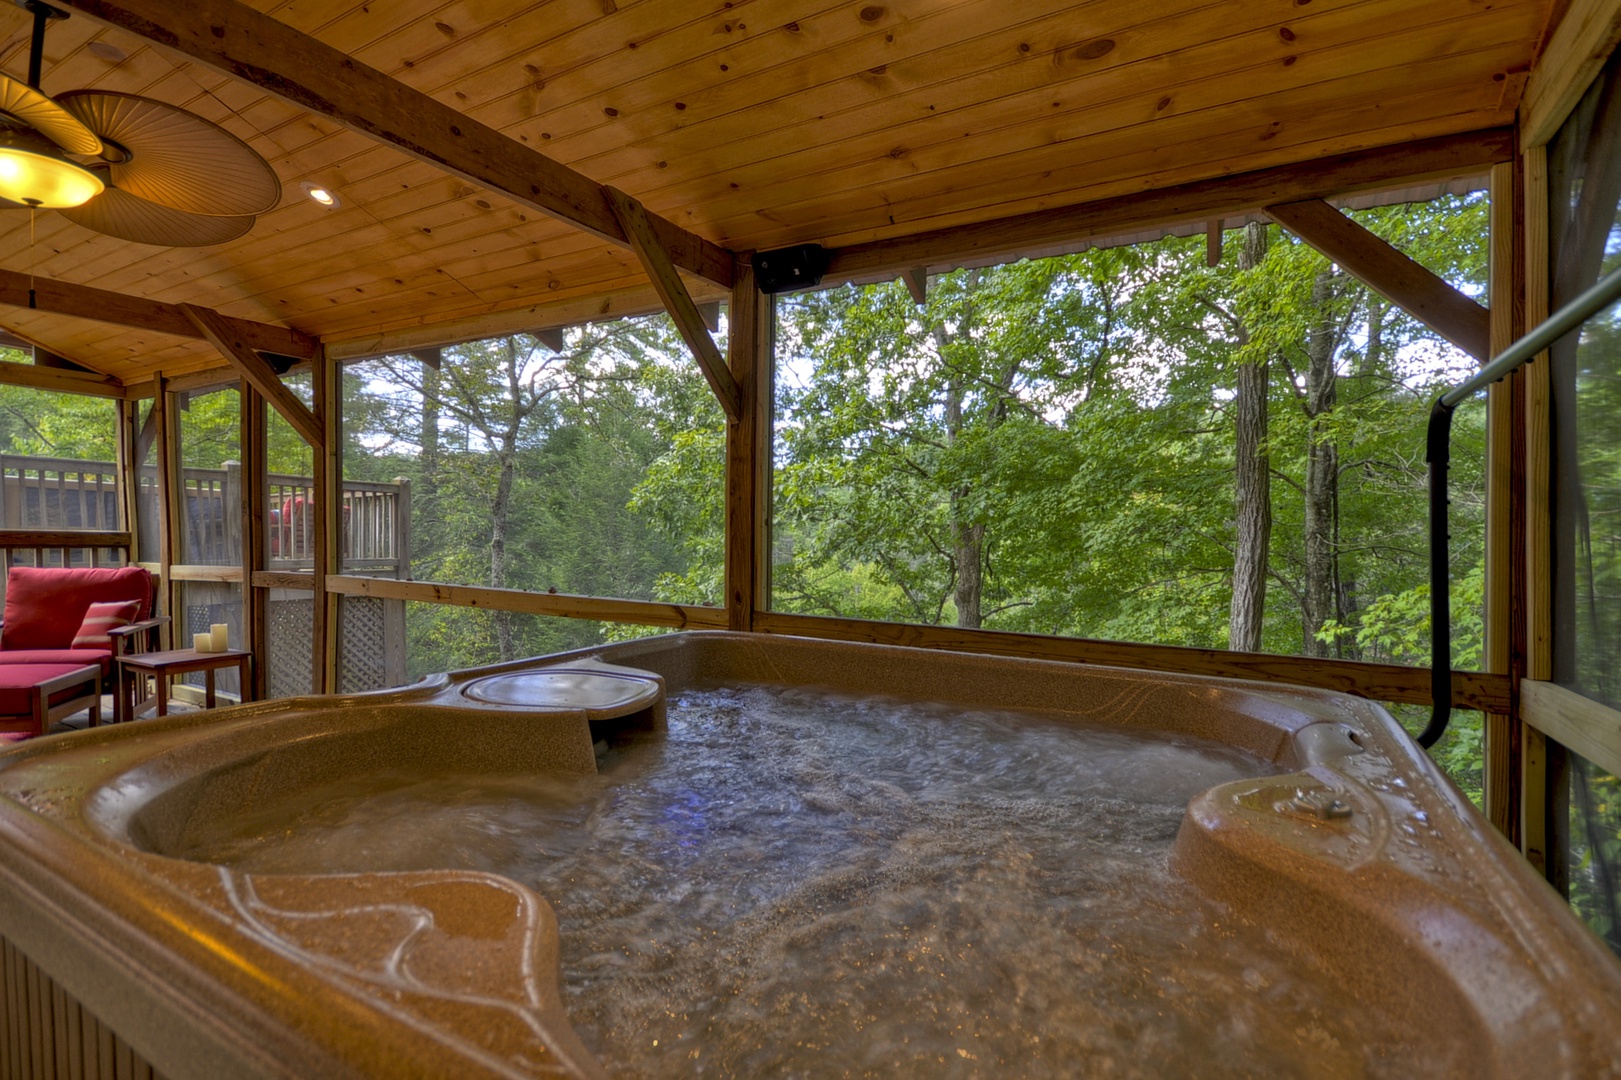 Toccoa Mist- Hot tub area with forest views